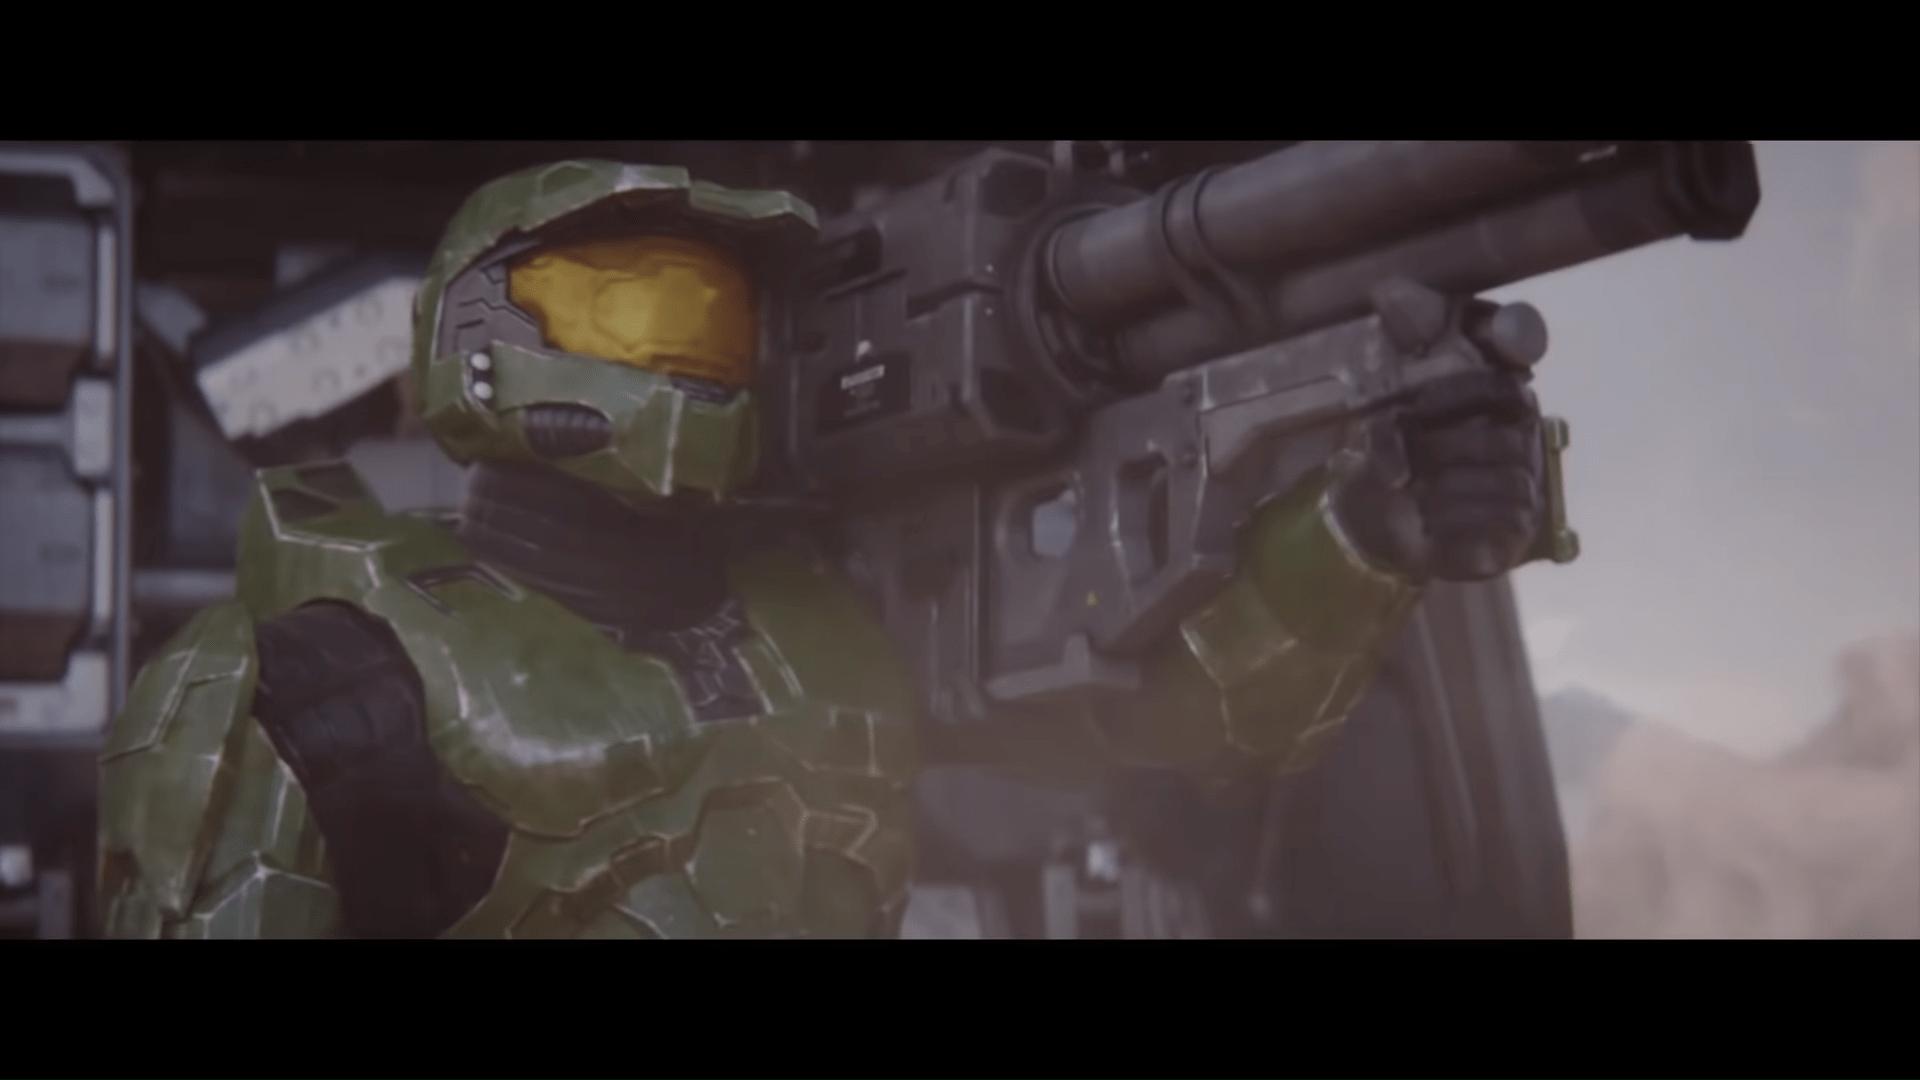 Halo Insiders Get To Test An Early Build Of Halo: Master Chief Collection For PC